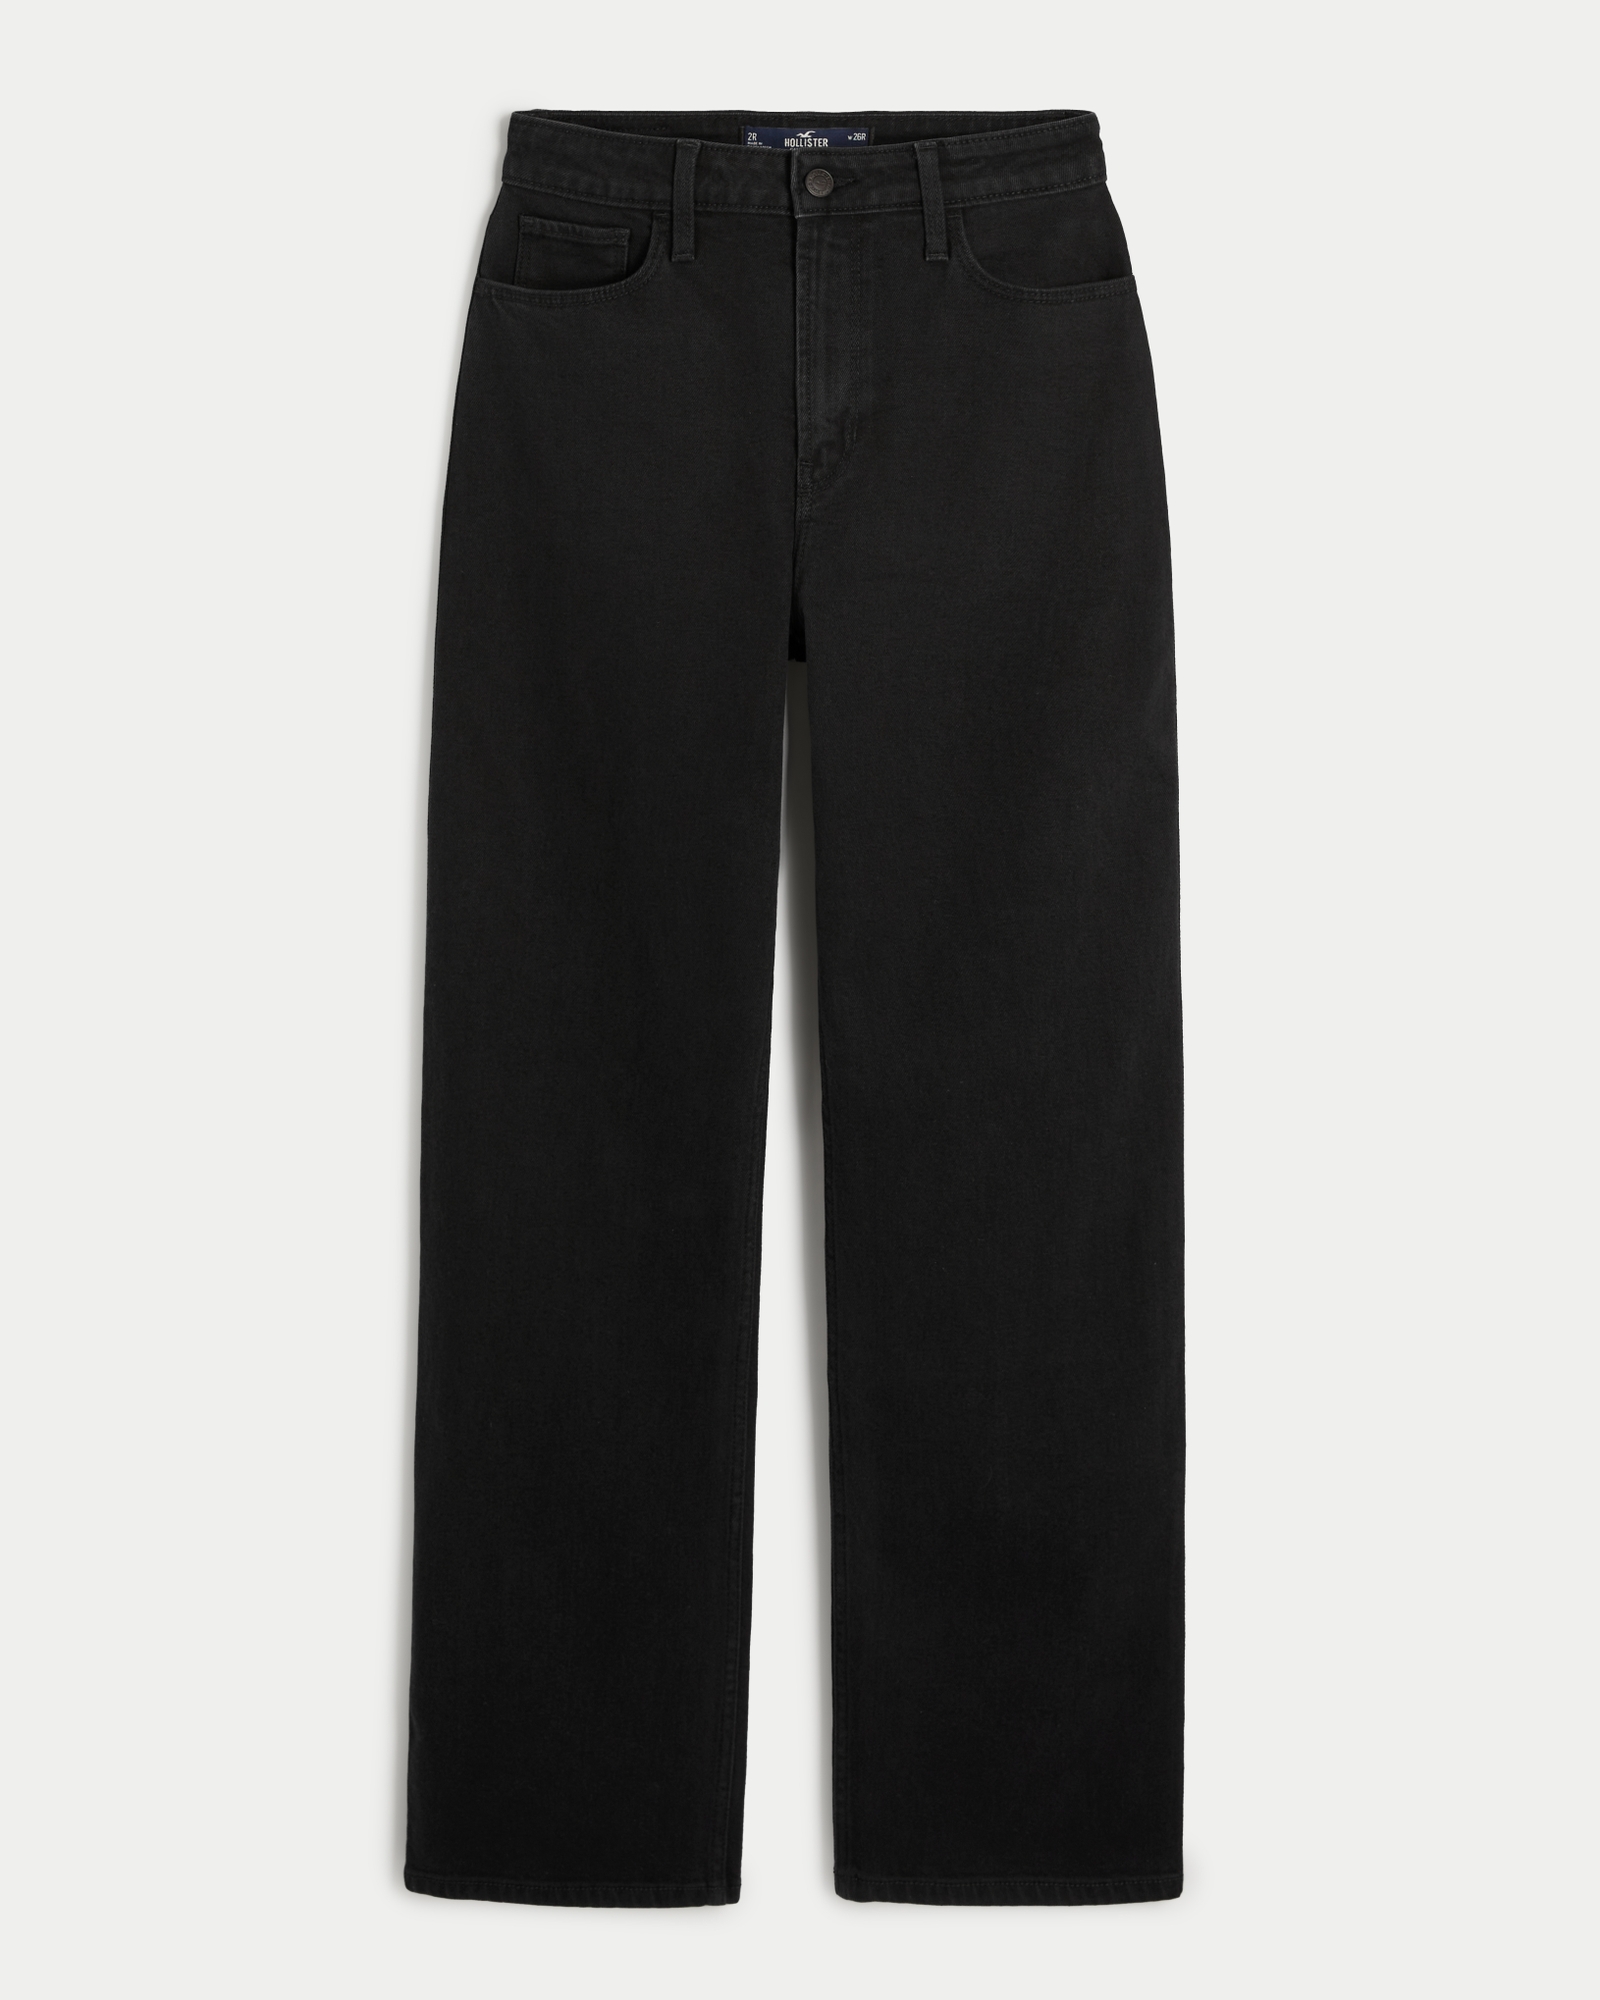 PLEATHER HIGH-RISE DAD PANTS. Made by Hollister.